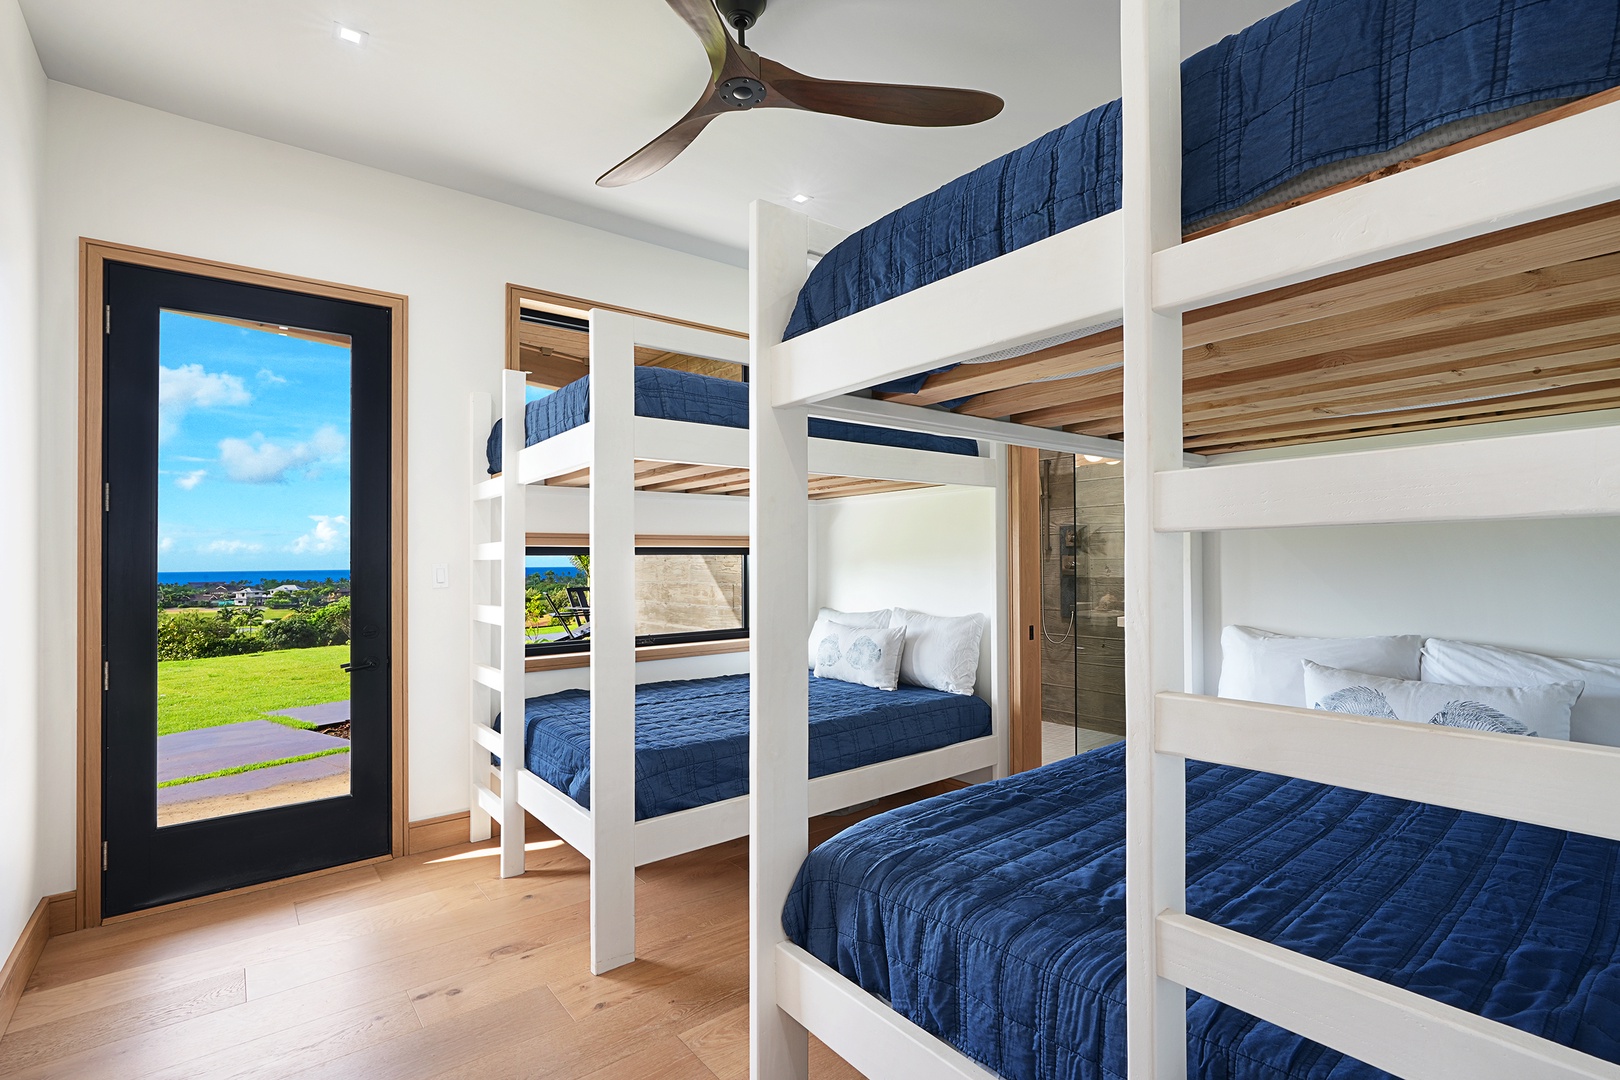 Koloa Vacation Rentals, Hale Keaka at Kukui'ula - Fun and comfort in the bunk room where plush beds and sweeping views promise a restful stay for friends and family alike.